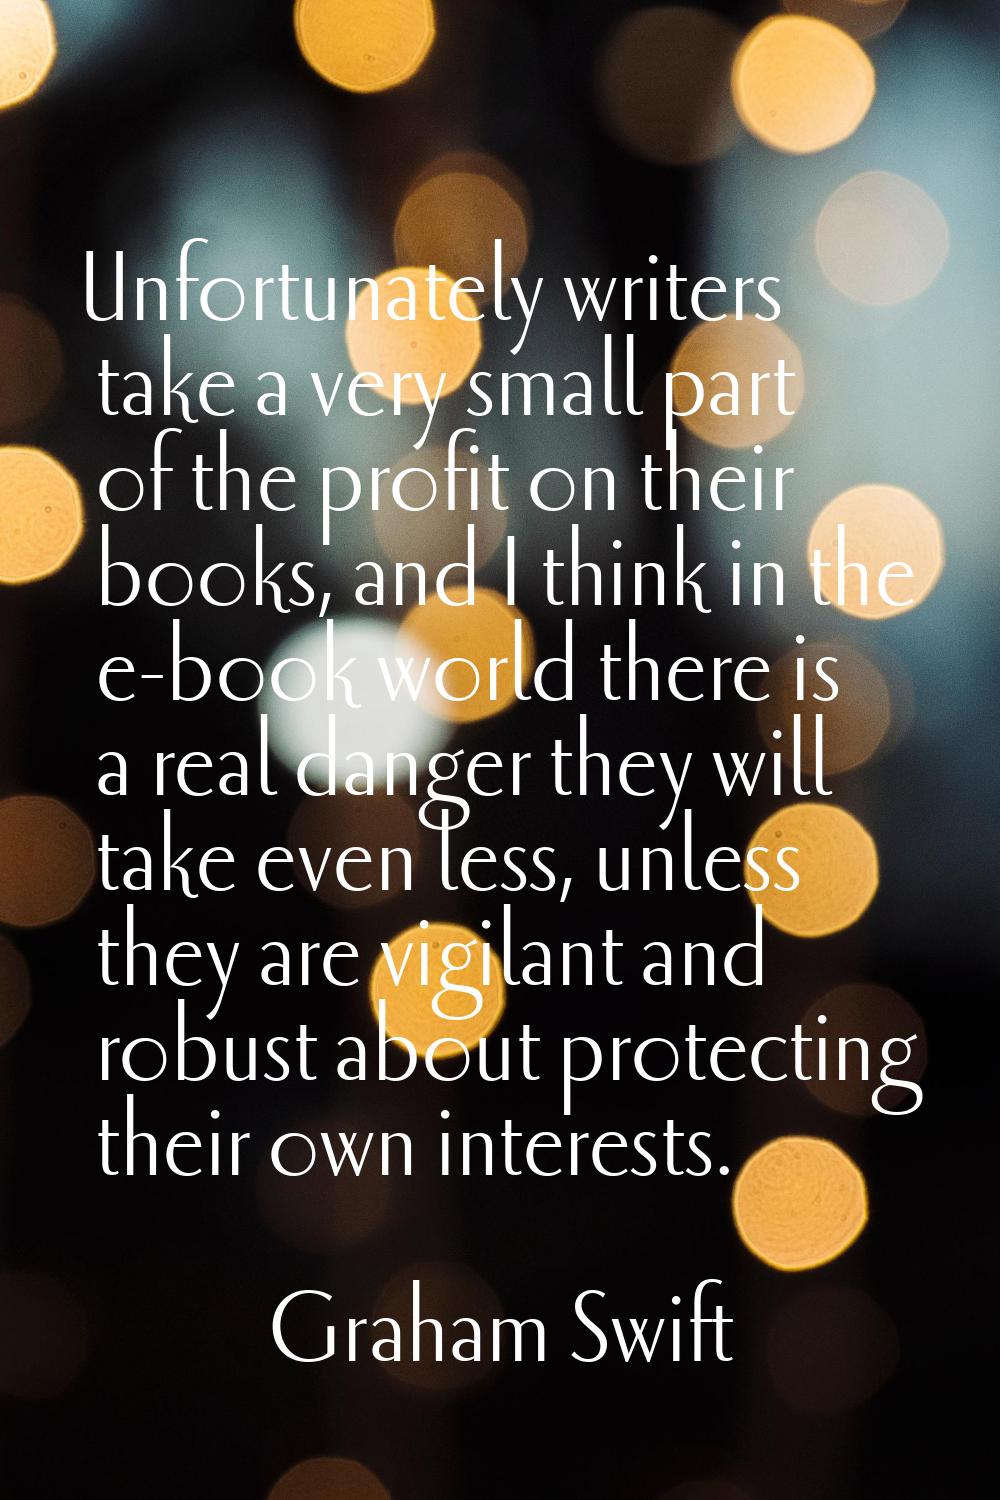 Unfortunately writers take a very small part of the profit on their books, and I think in the e-boo